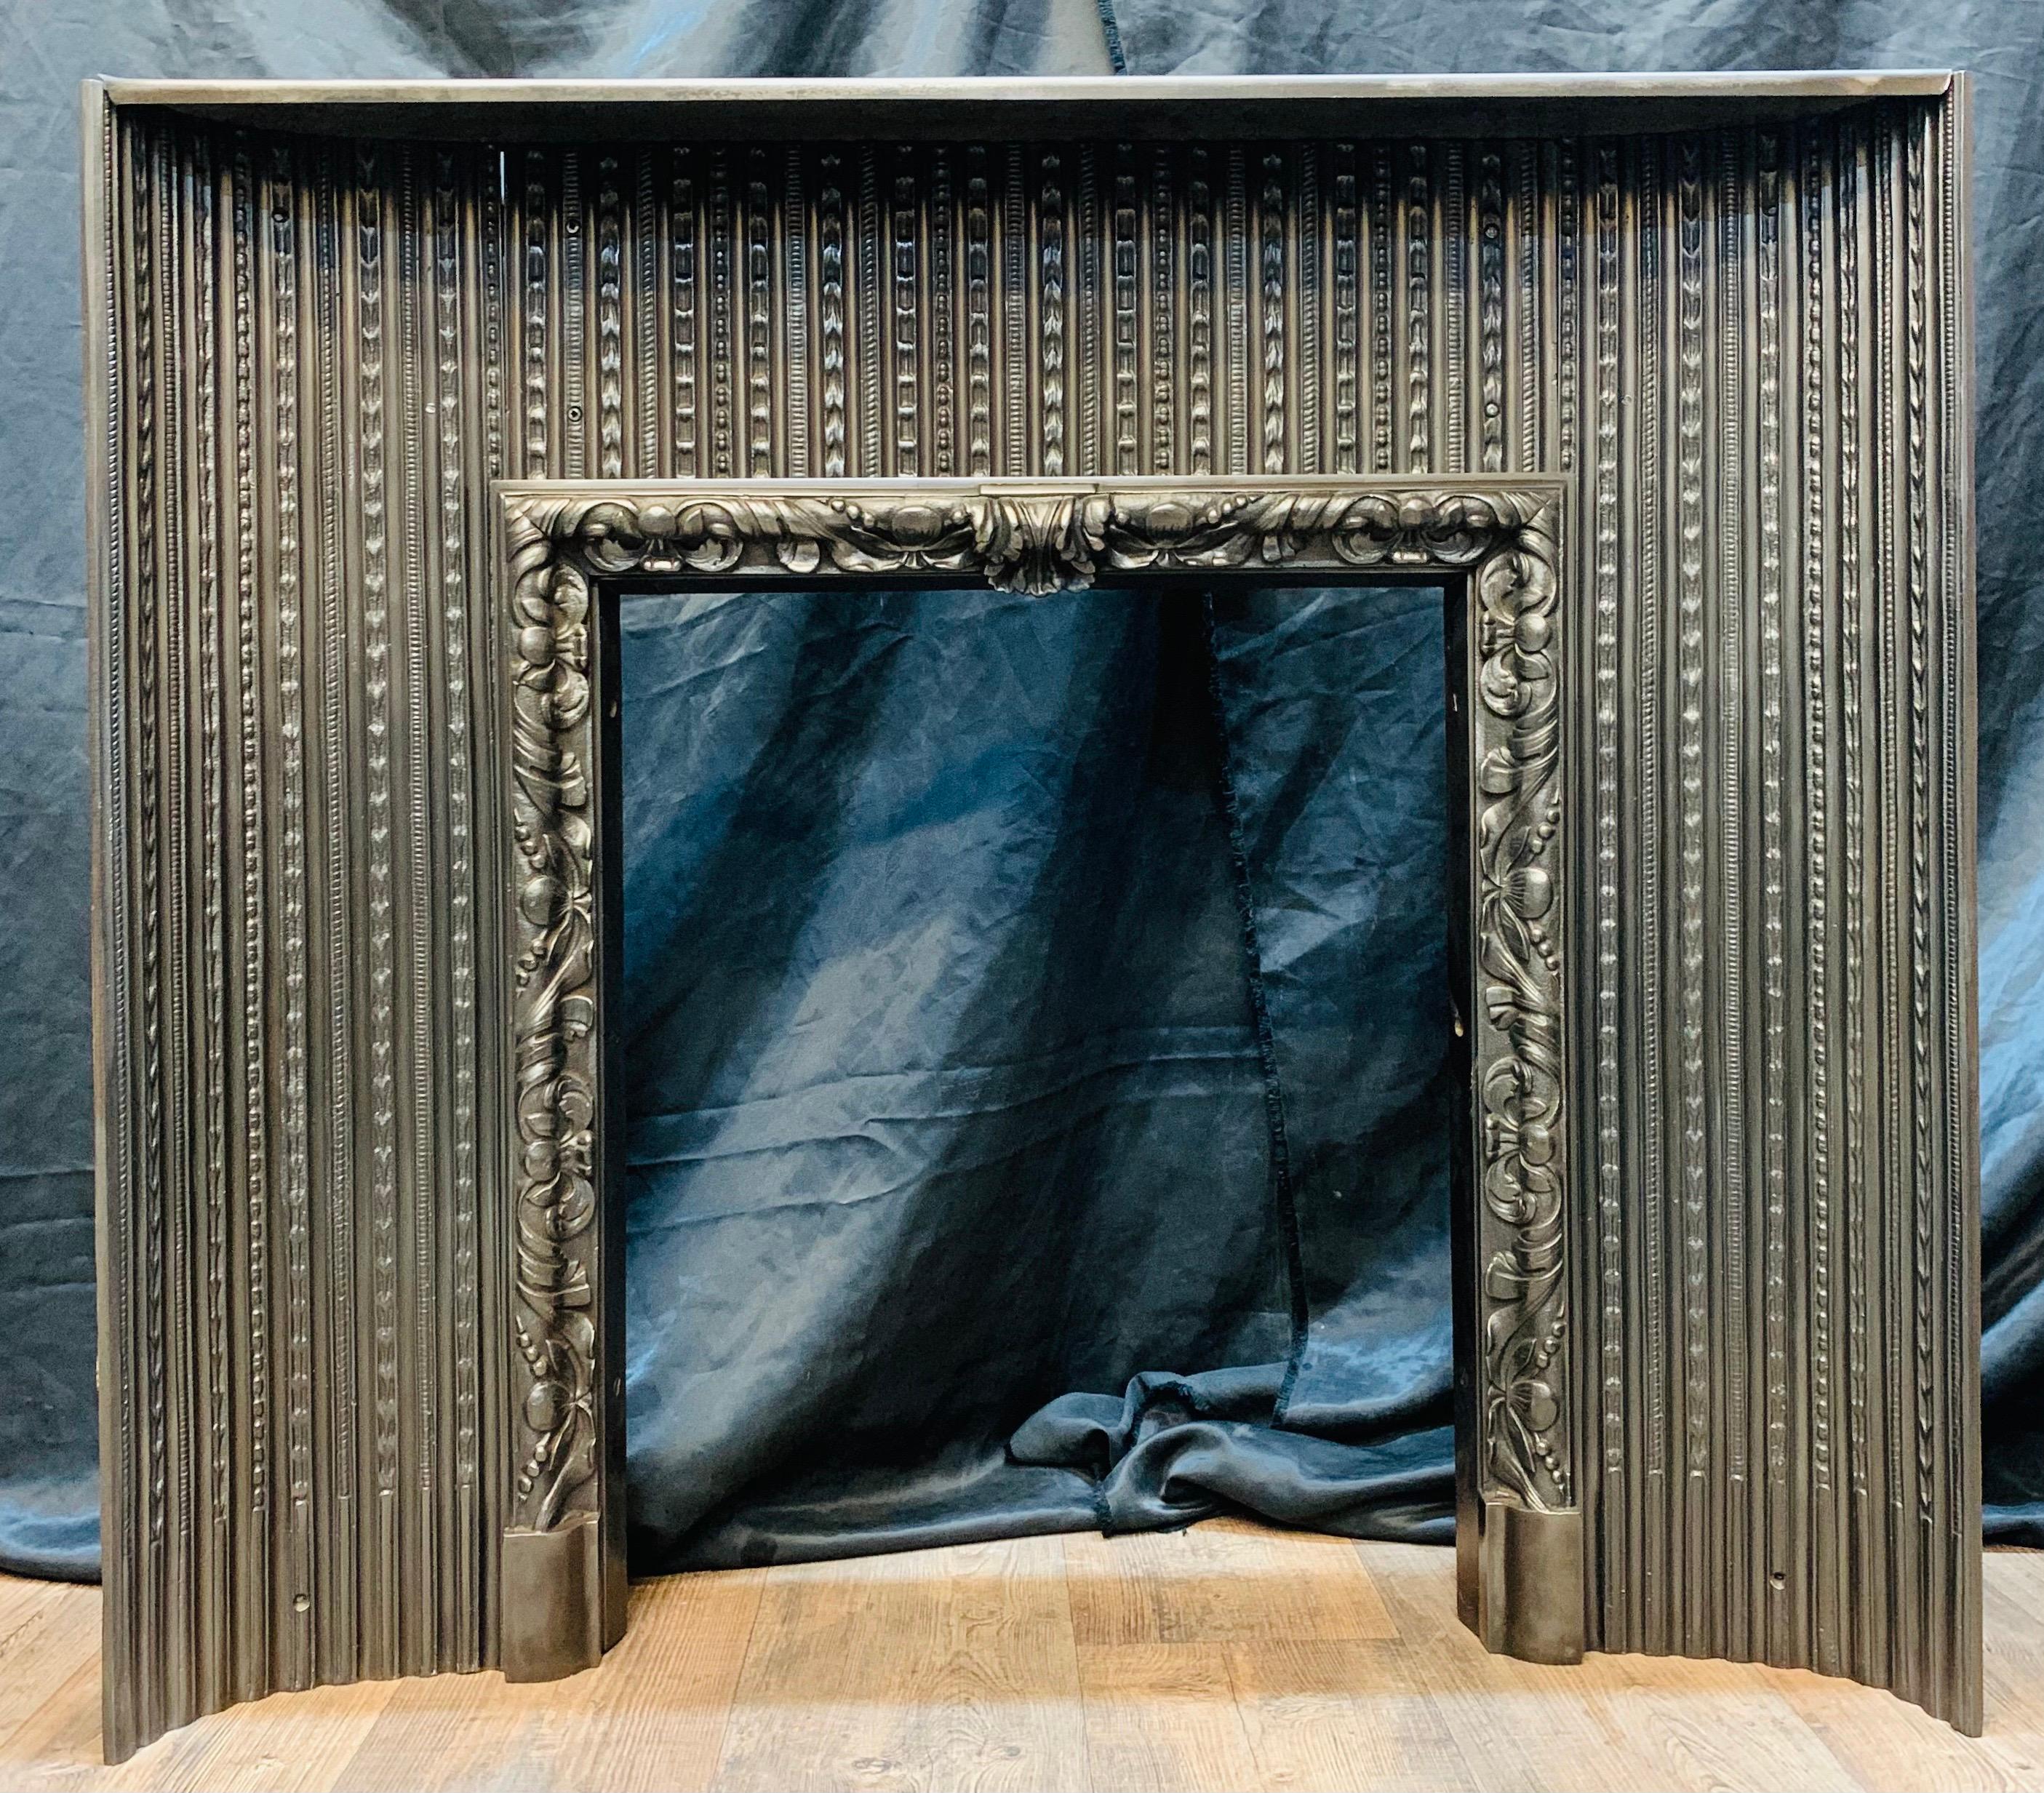 An early 19th century Regency cast iron fireplace insert of excellent quality. Convex interior ribbed panels connect to a central acanthus leaf internal fire frame resting on foot blocks. Graphite polished to bring out the quality of the castings.